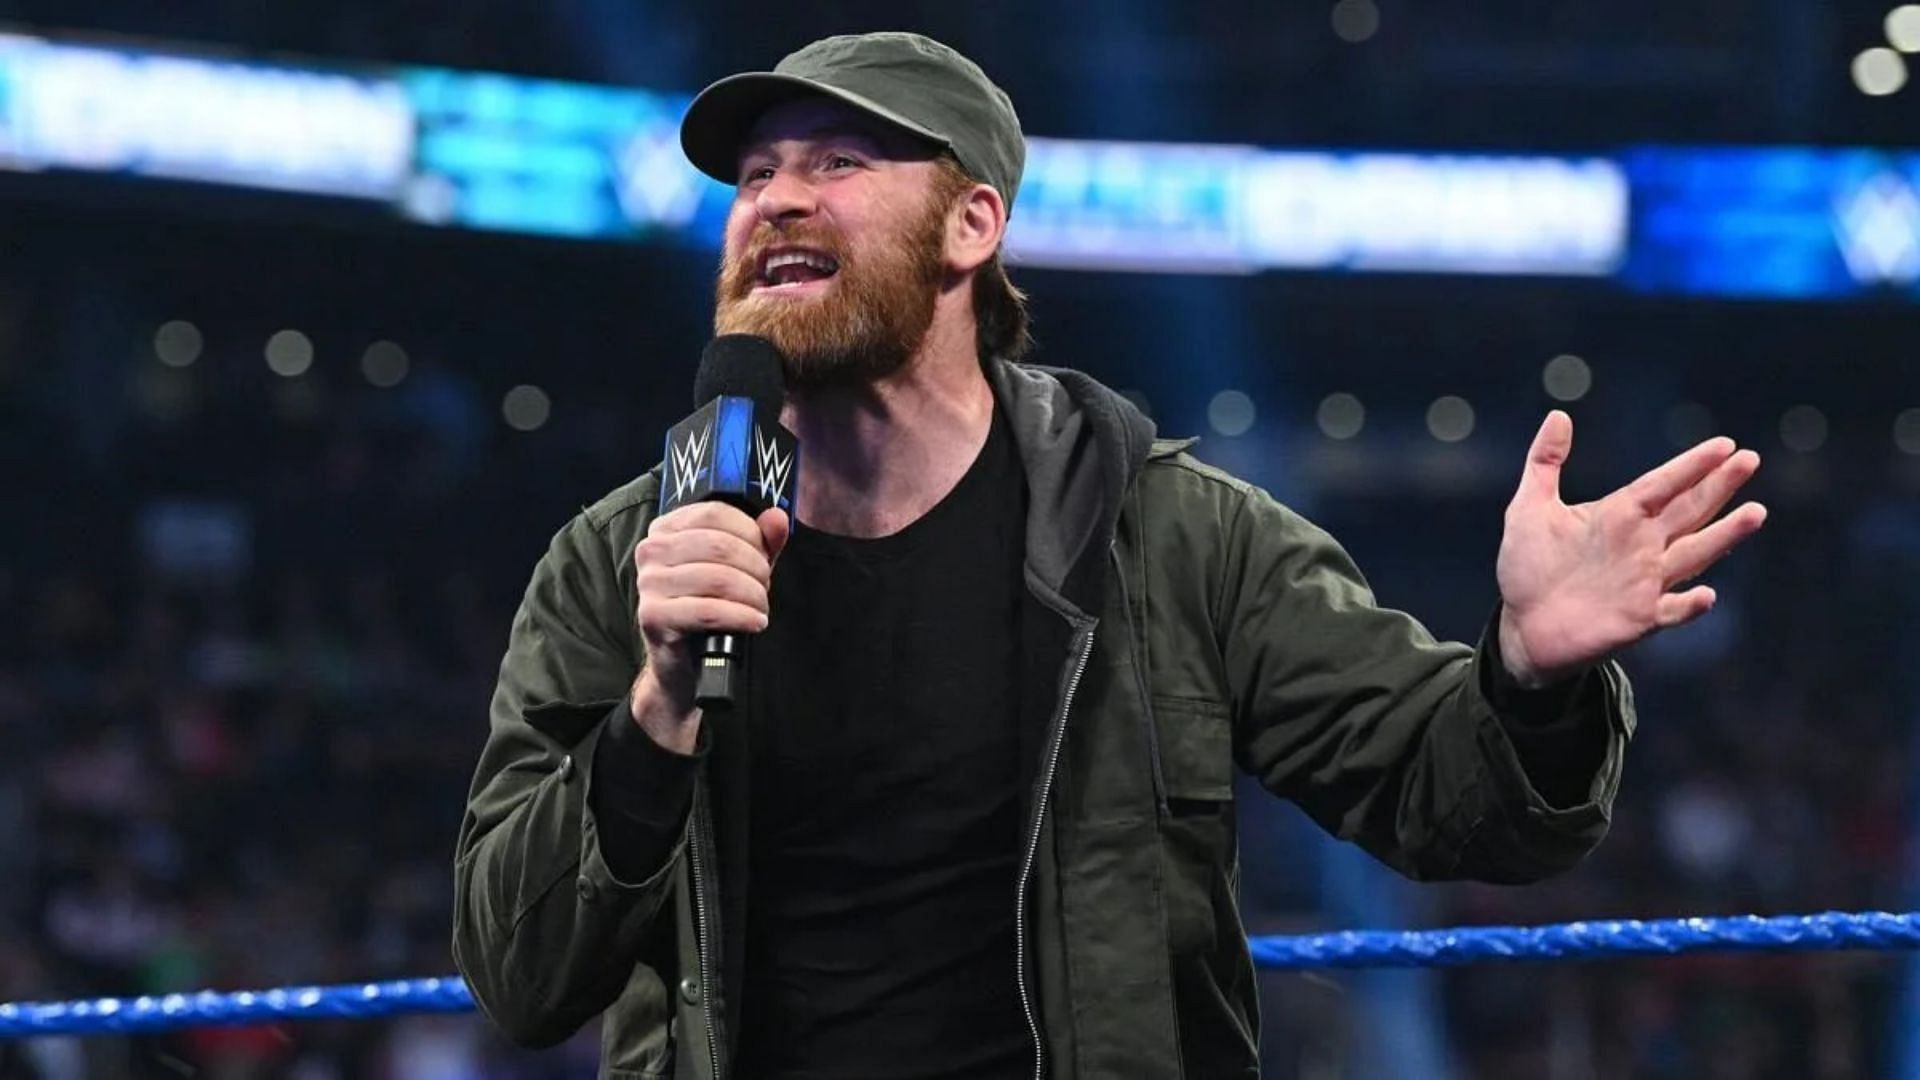 Sami Zayn on Dusty Rhodes helping him with his promos early in his WWE career.